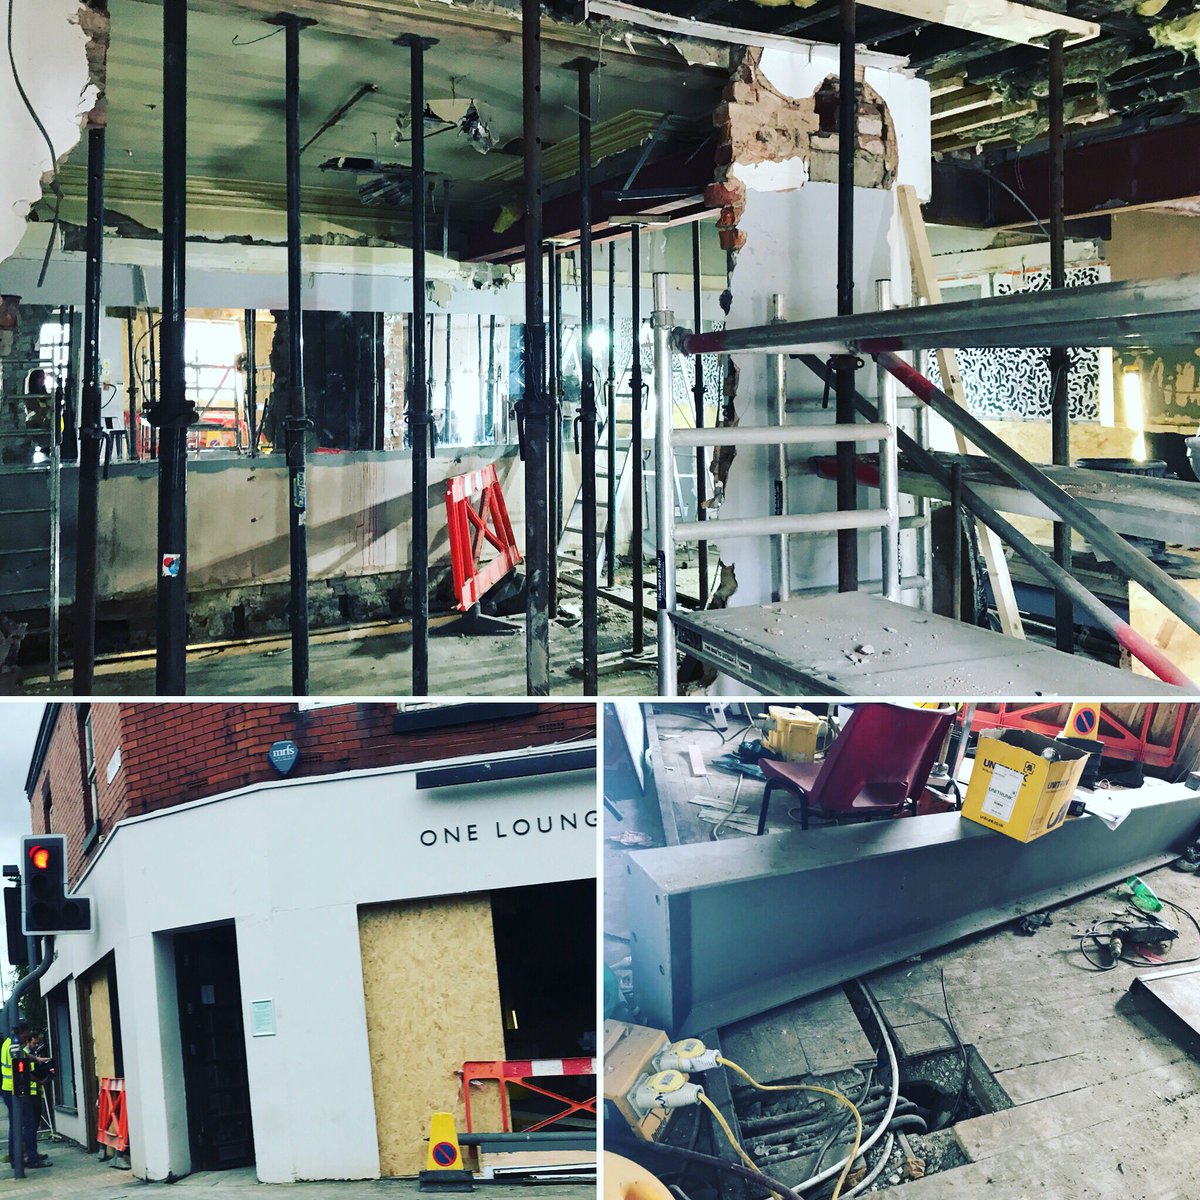 Strip out works complete at our new job in West Didsbury with @TJMProjectsLtd ...structural beams going in...due to open in September! 🤗
#dv8style #dv8designs #westdidsbury #bar #refurb #interiordesign #projectmanagement #structuralworks #newname #watchthisspace #dv8onsite